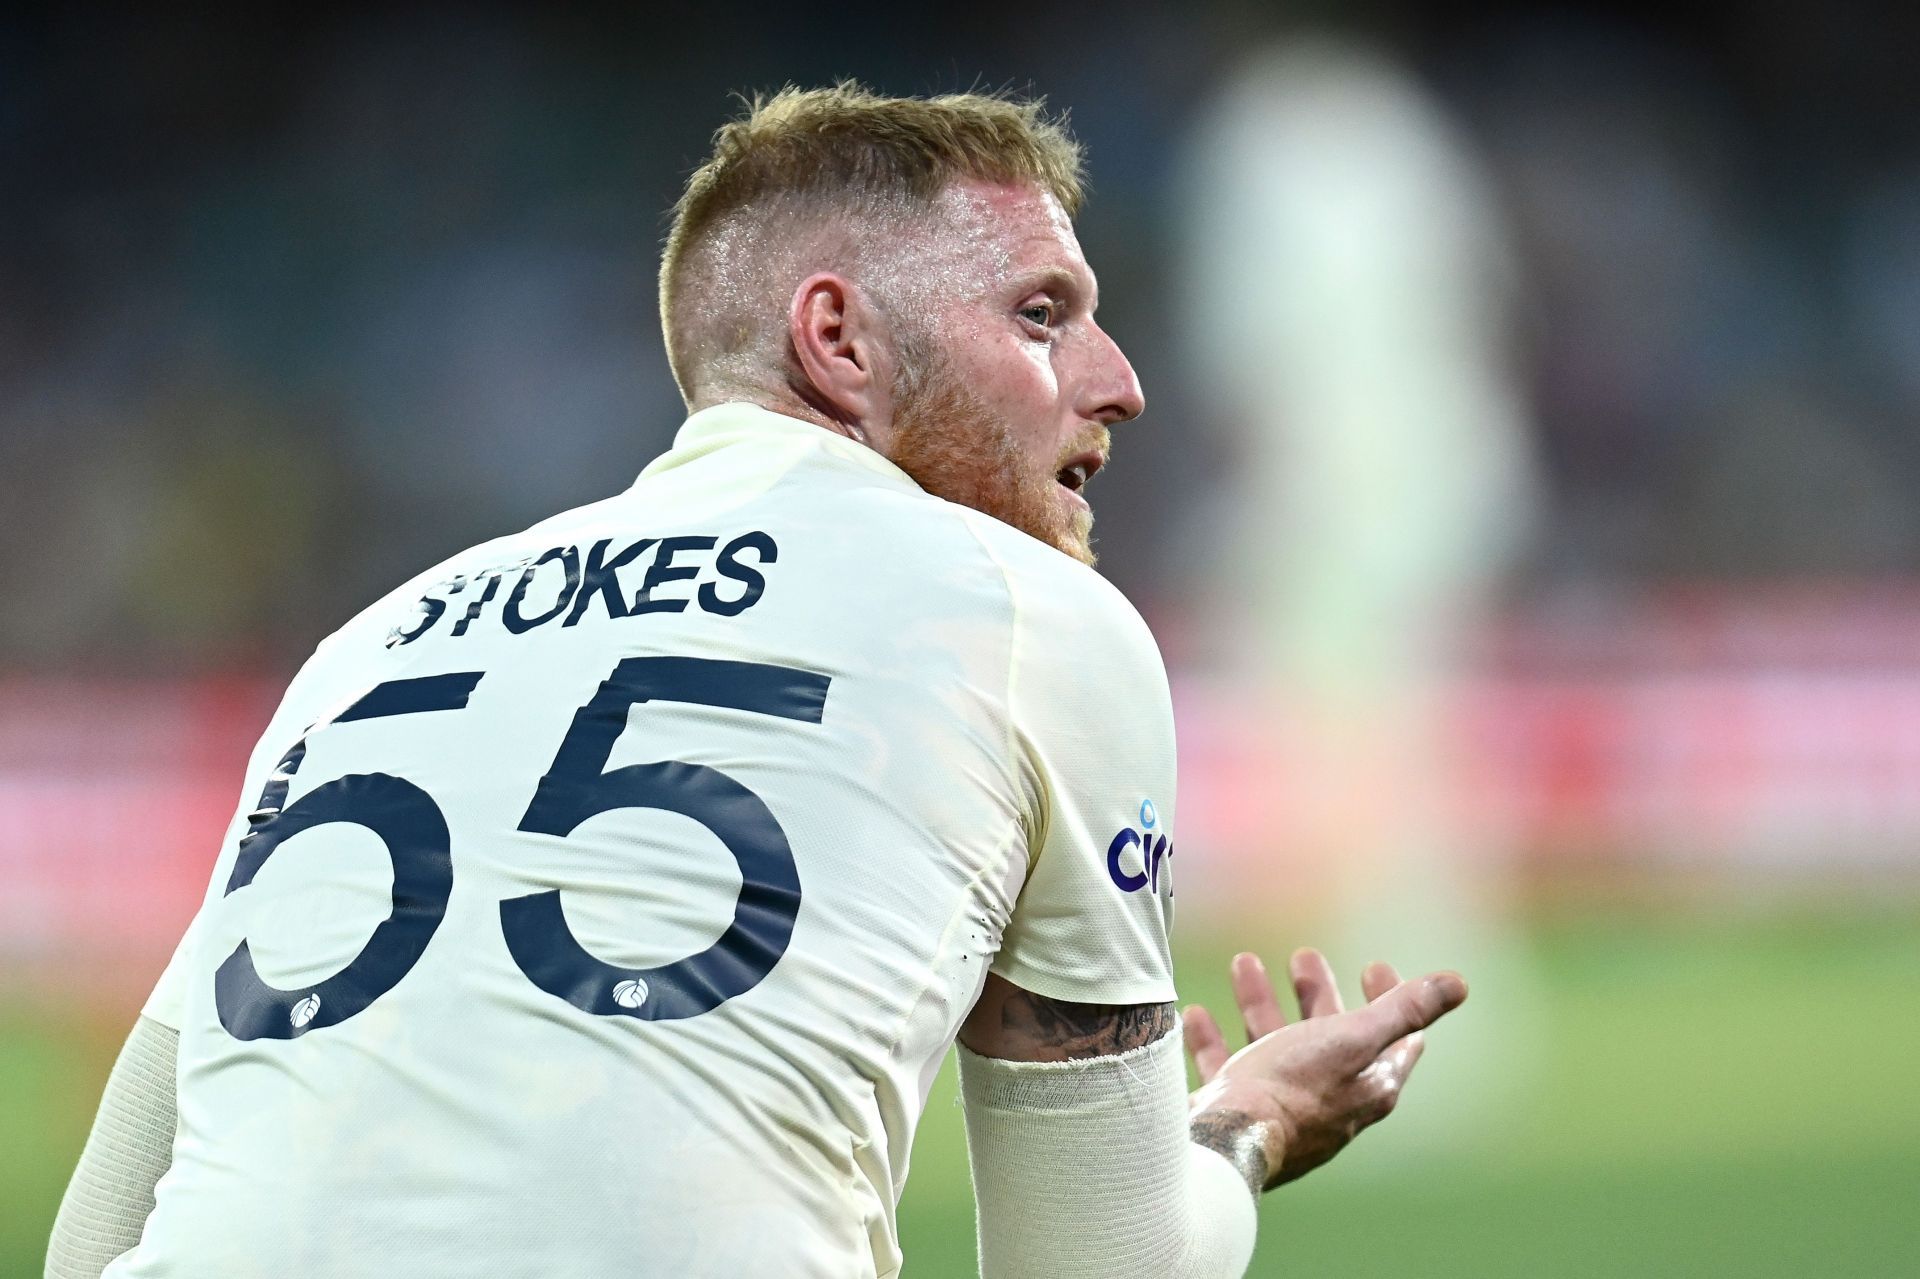 Many have primed Ben Stokes as the next Test captain of England